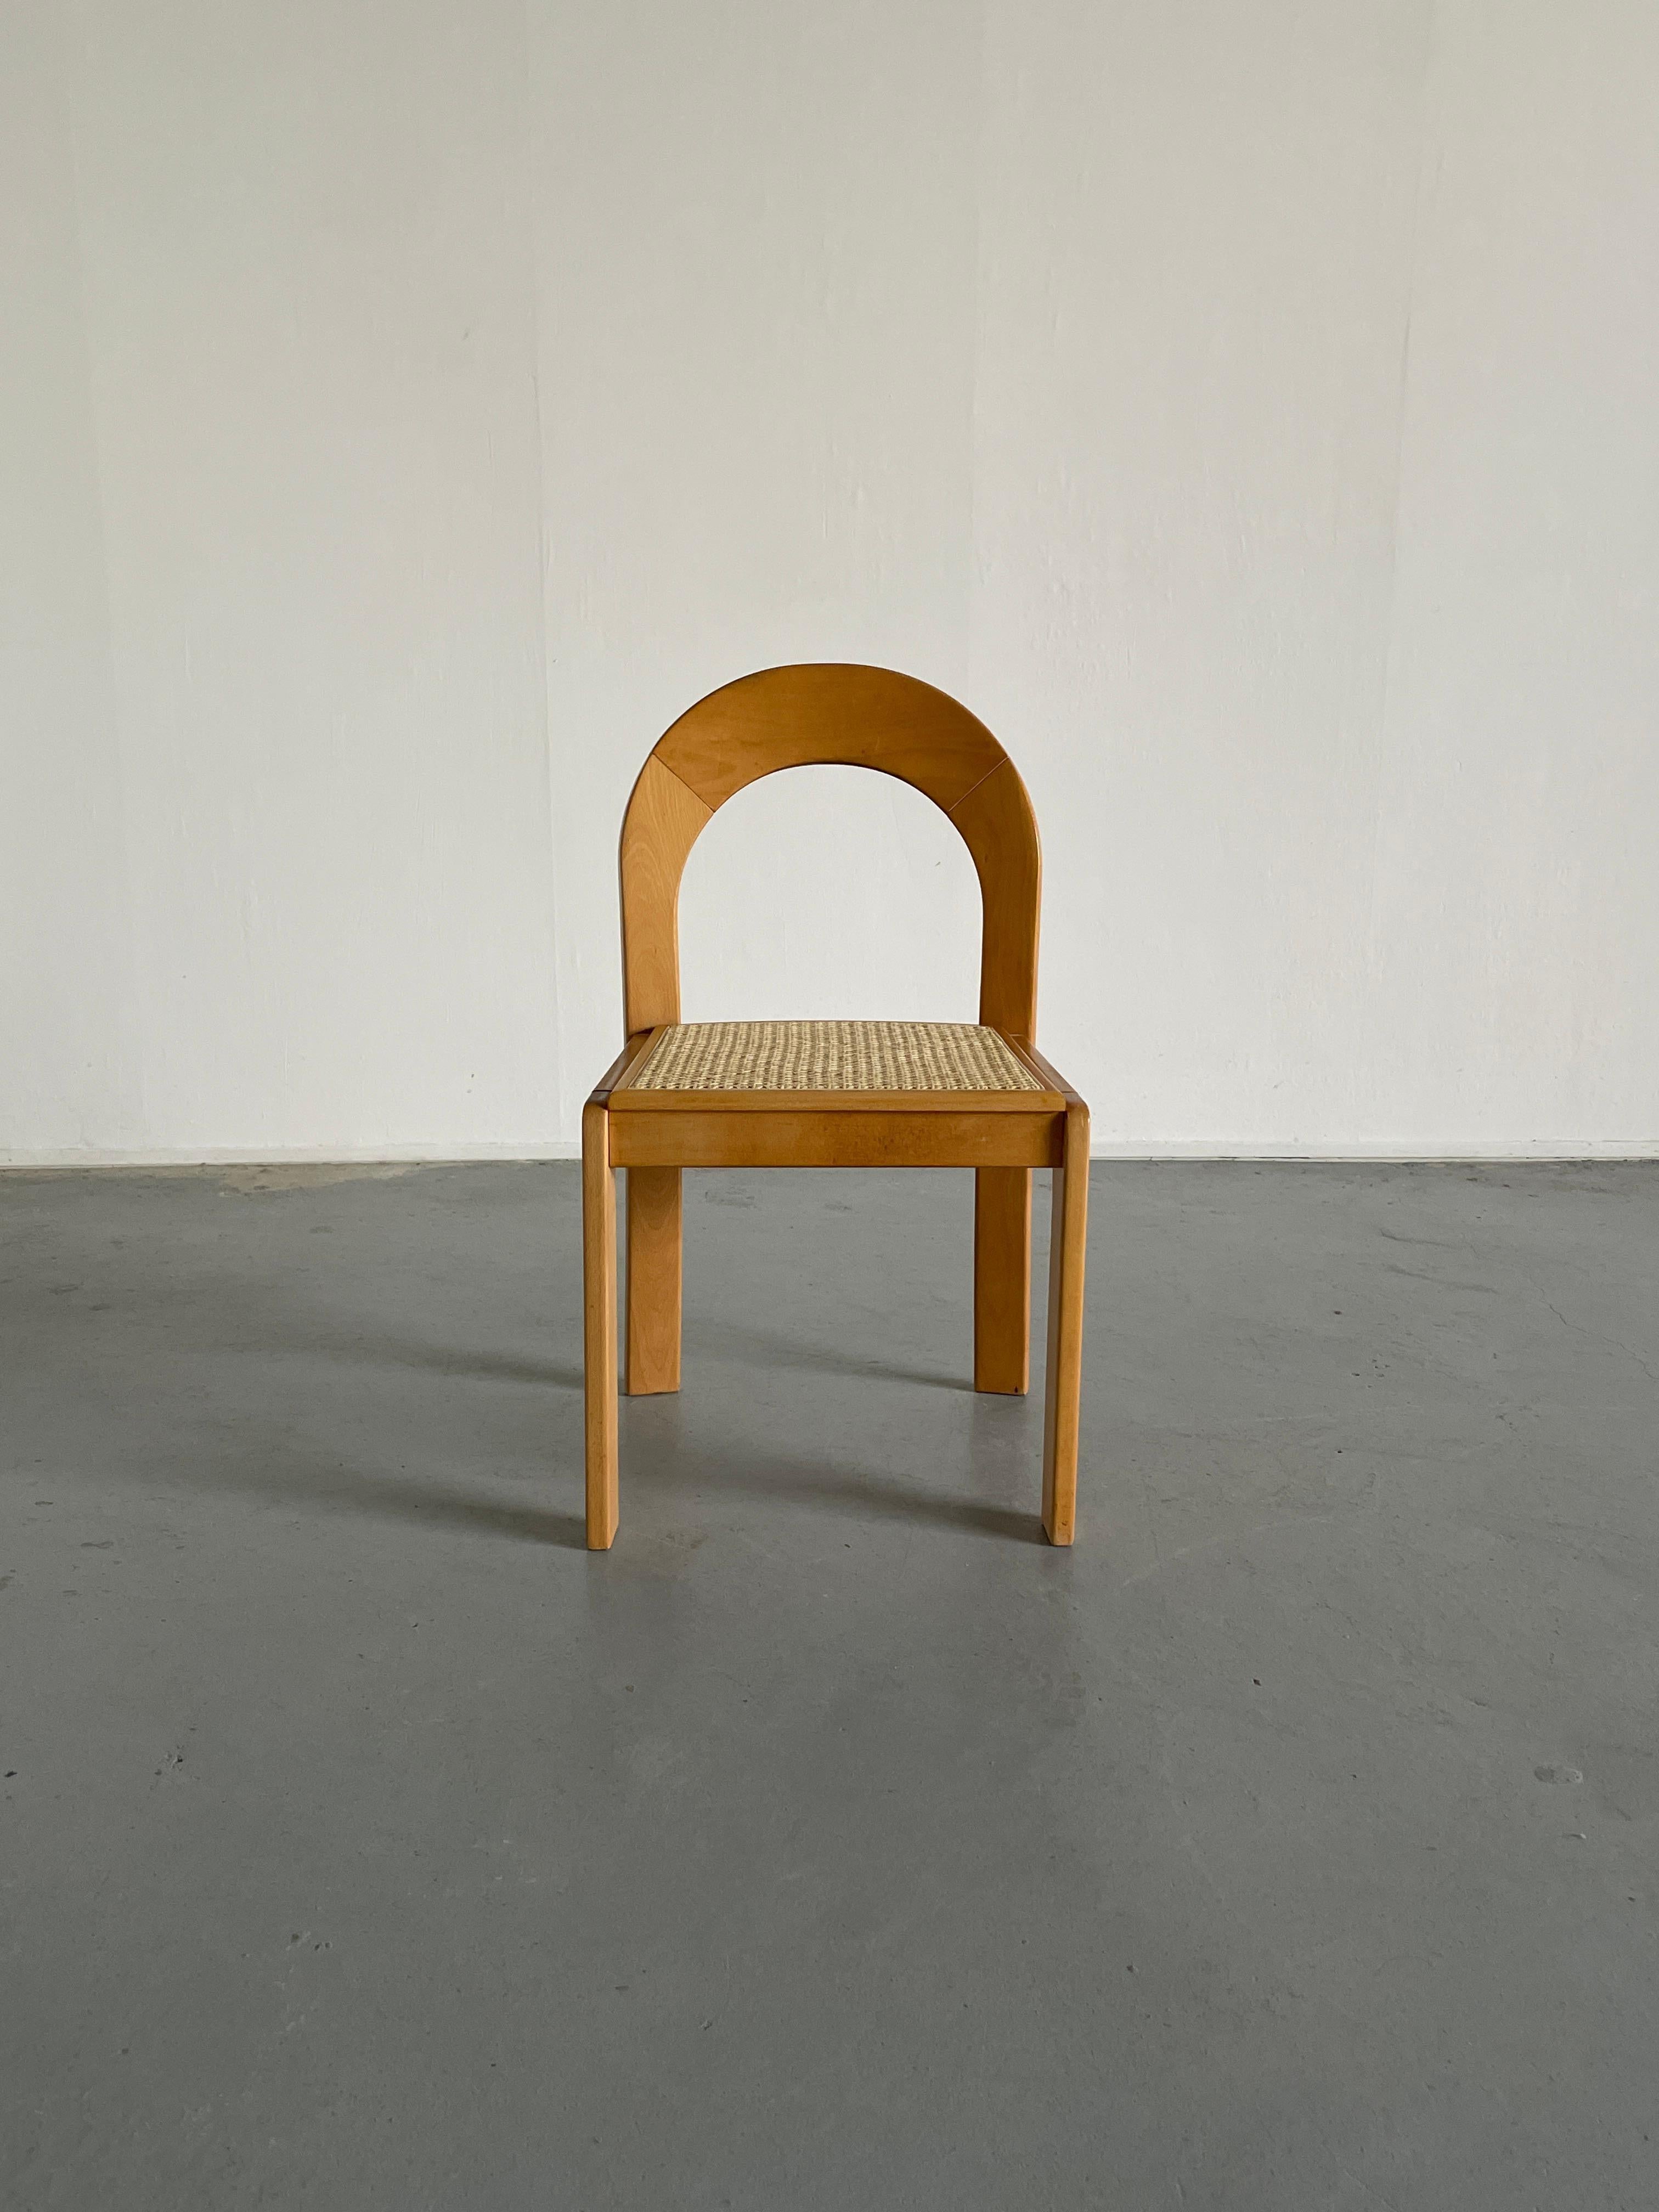 Cane 1 of 3 Vintage Dining Chairs Attributed to Tagliabue di Cascina Armata, 1974